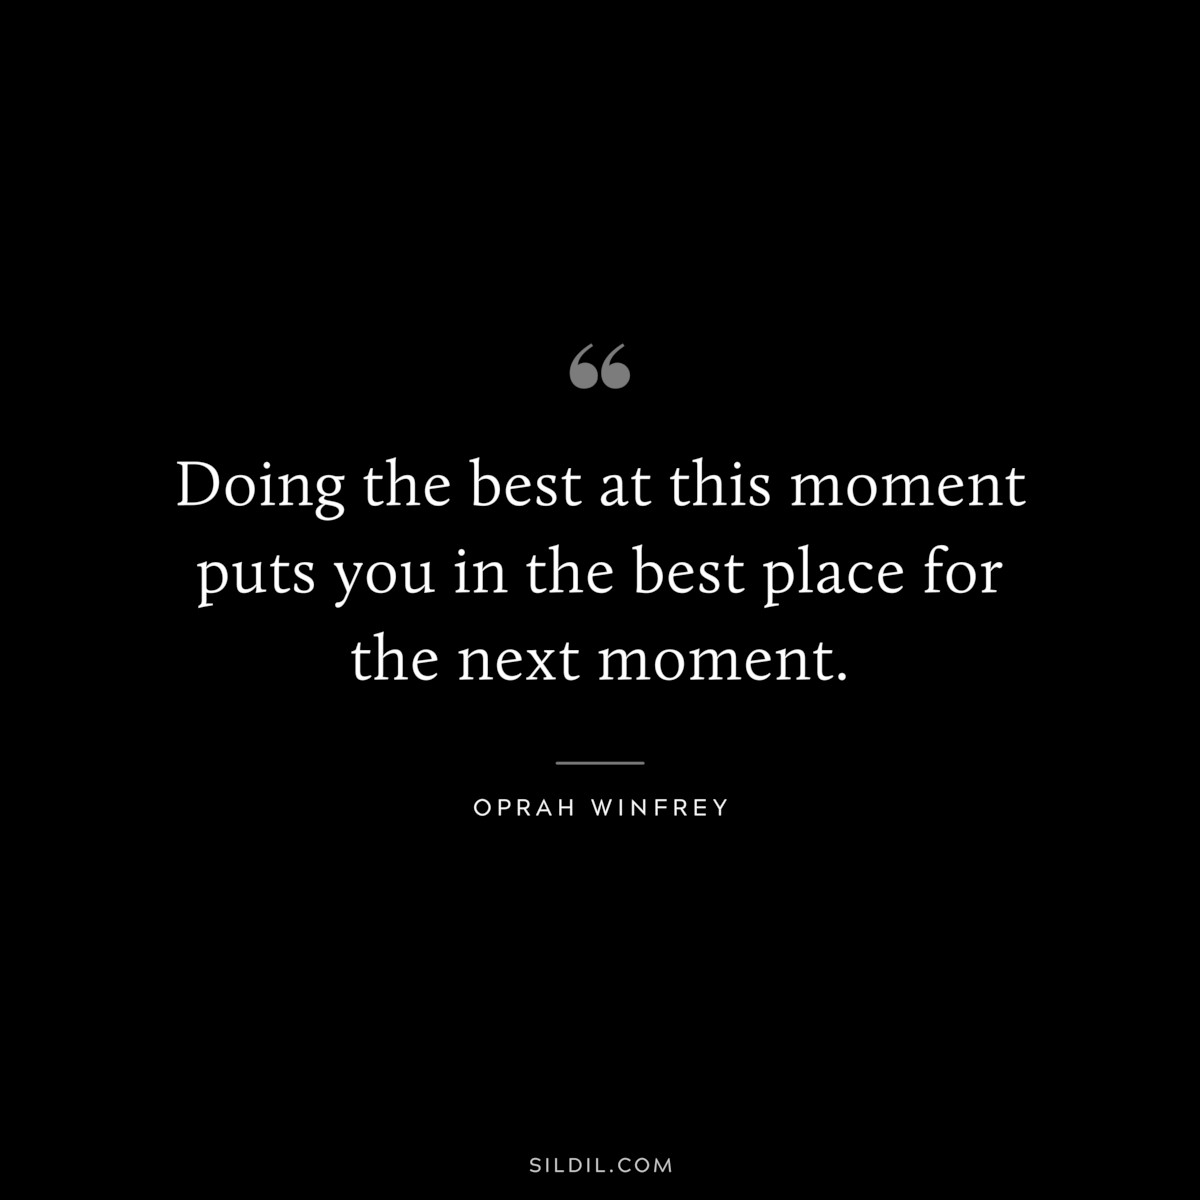 Doing the best at this moment puts you in the best place for the next moment. ― Oprah Winfrey